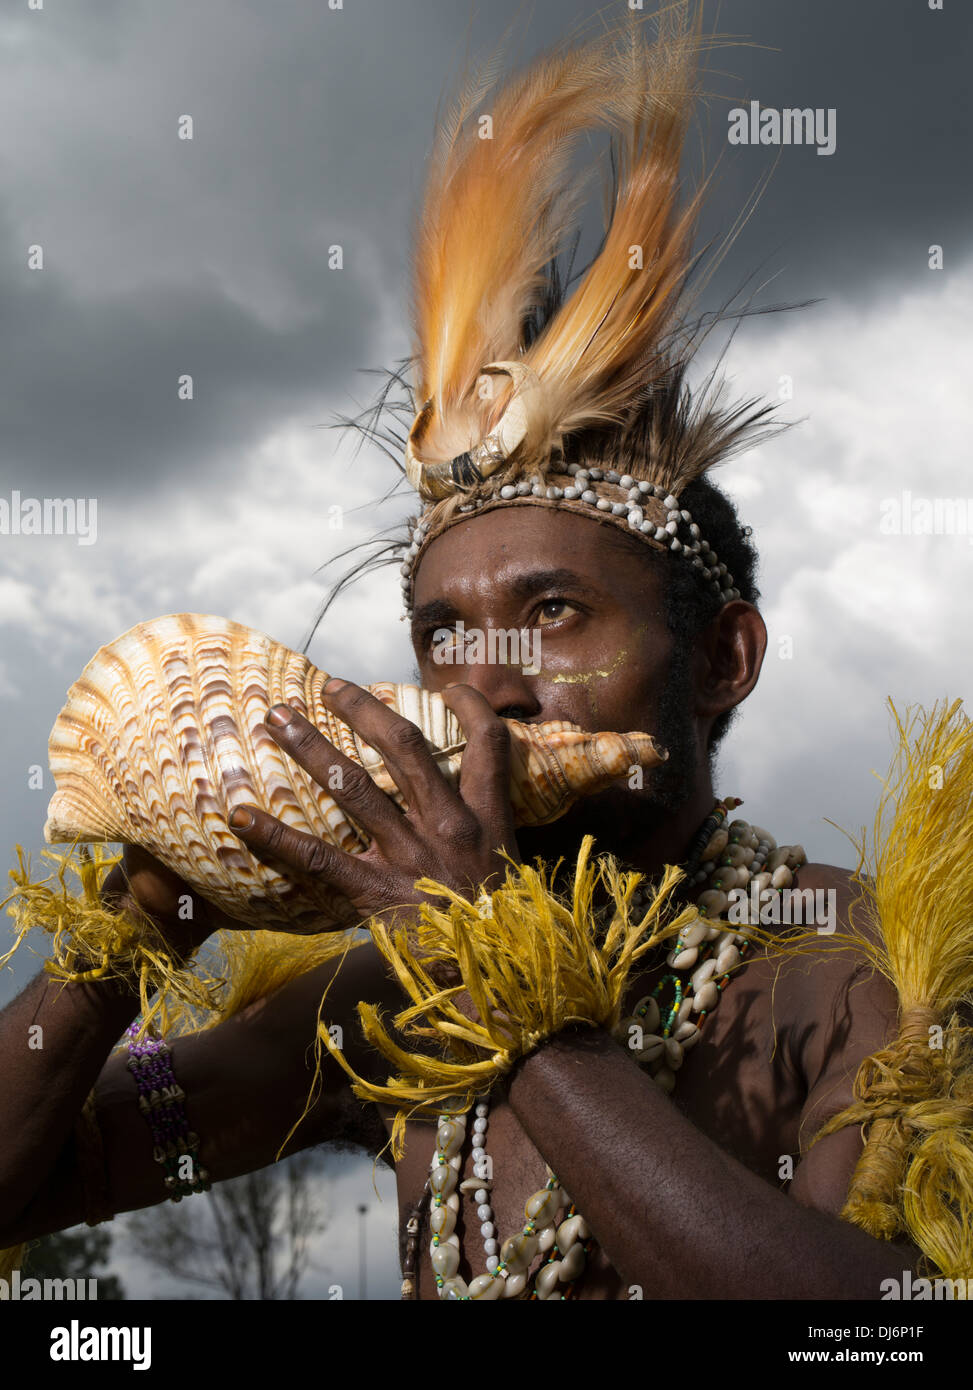 Man with conch shell horn , Eastern Highlands Province - Goroka Show, Papua New Guinea Stock Photo